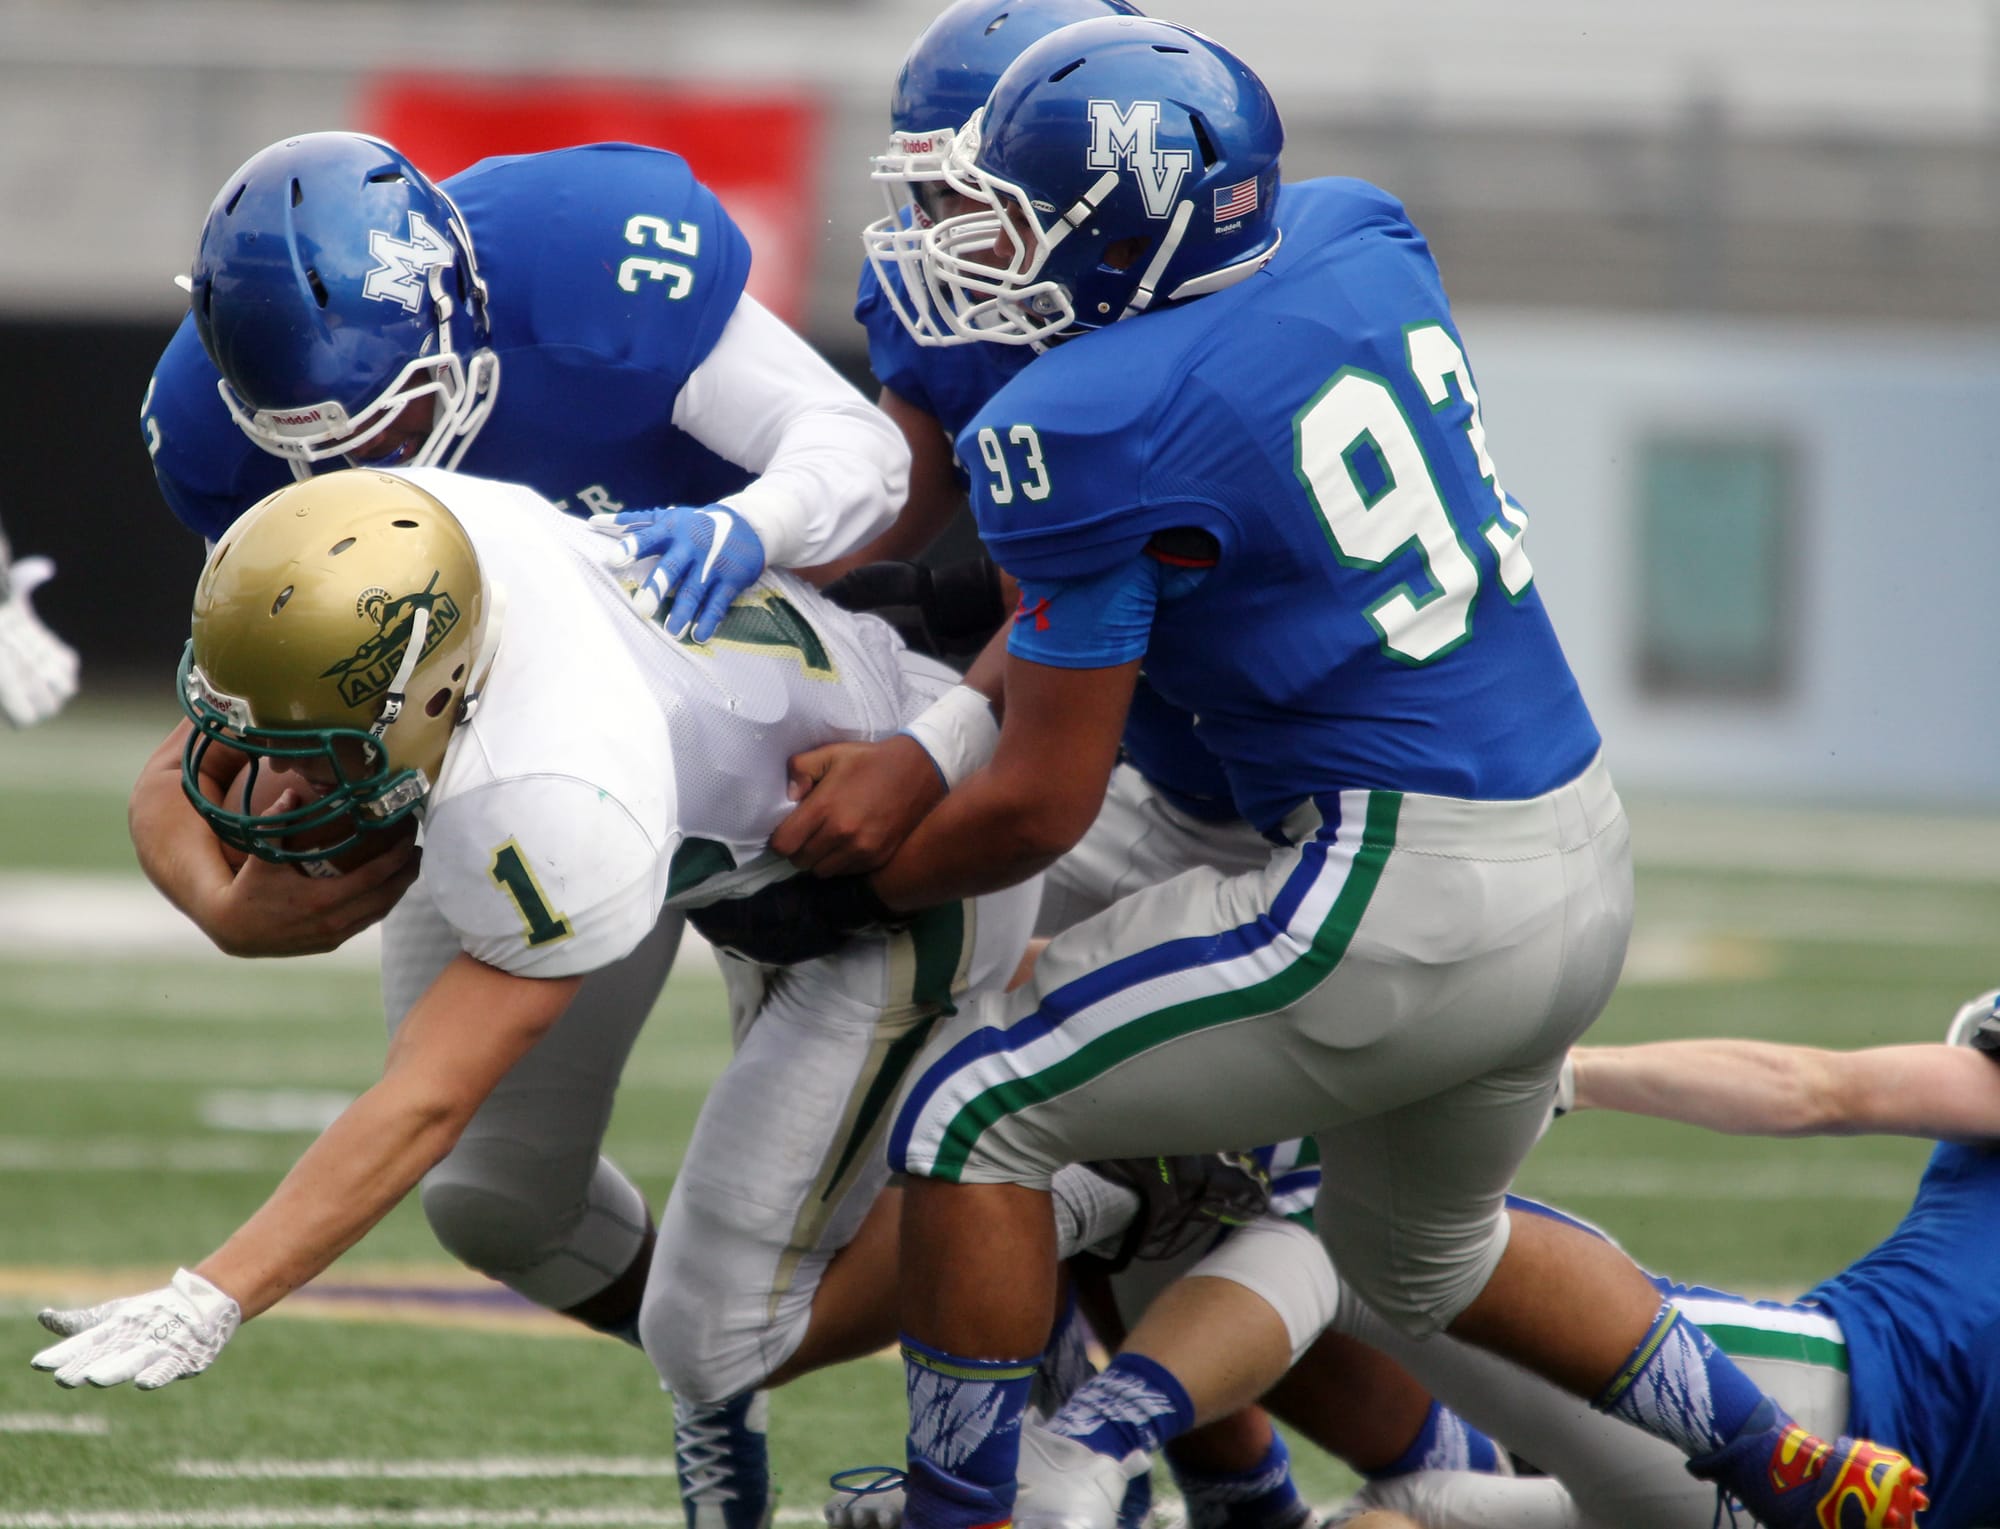 Mountain View's Kimball Elliott (32), Isaiah Carbajal (59) and  Chandler Alvarado (93) bring down Auburn's quarterback Justin Tuia in the first quarter of the 2015 Emerald City Kickoff Classic at Husky Stadium  in Seattle.